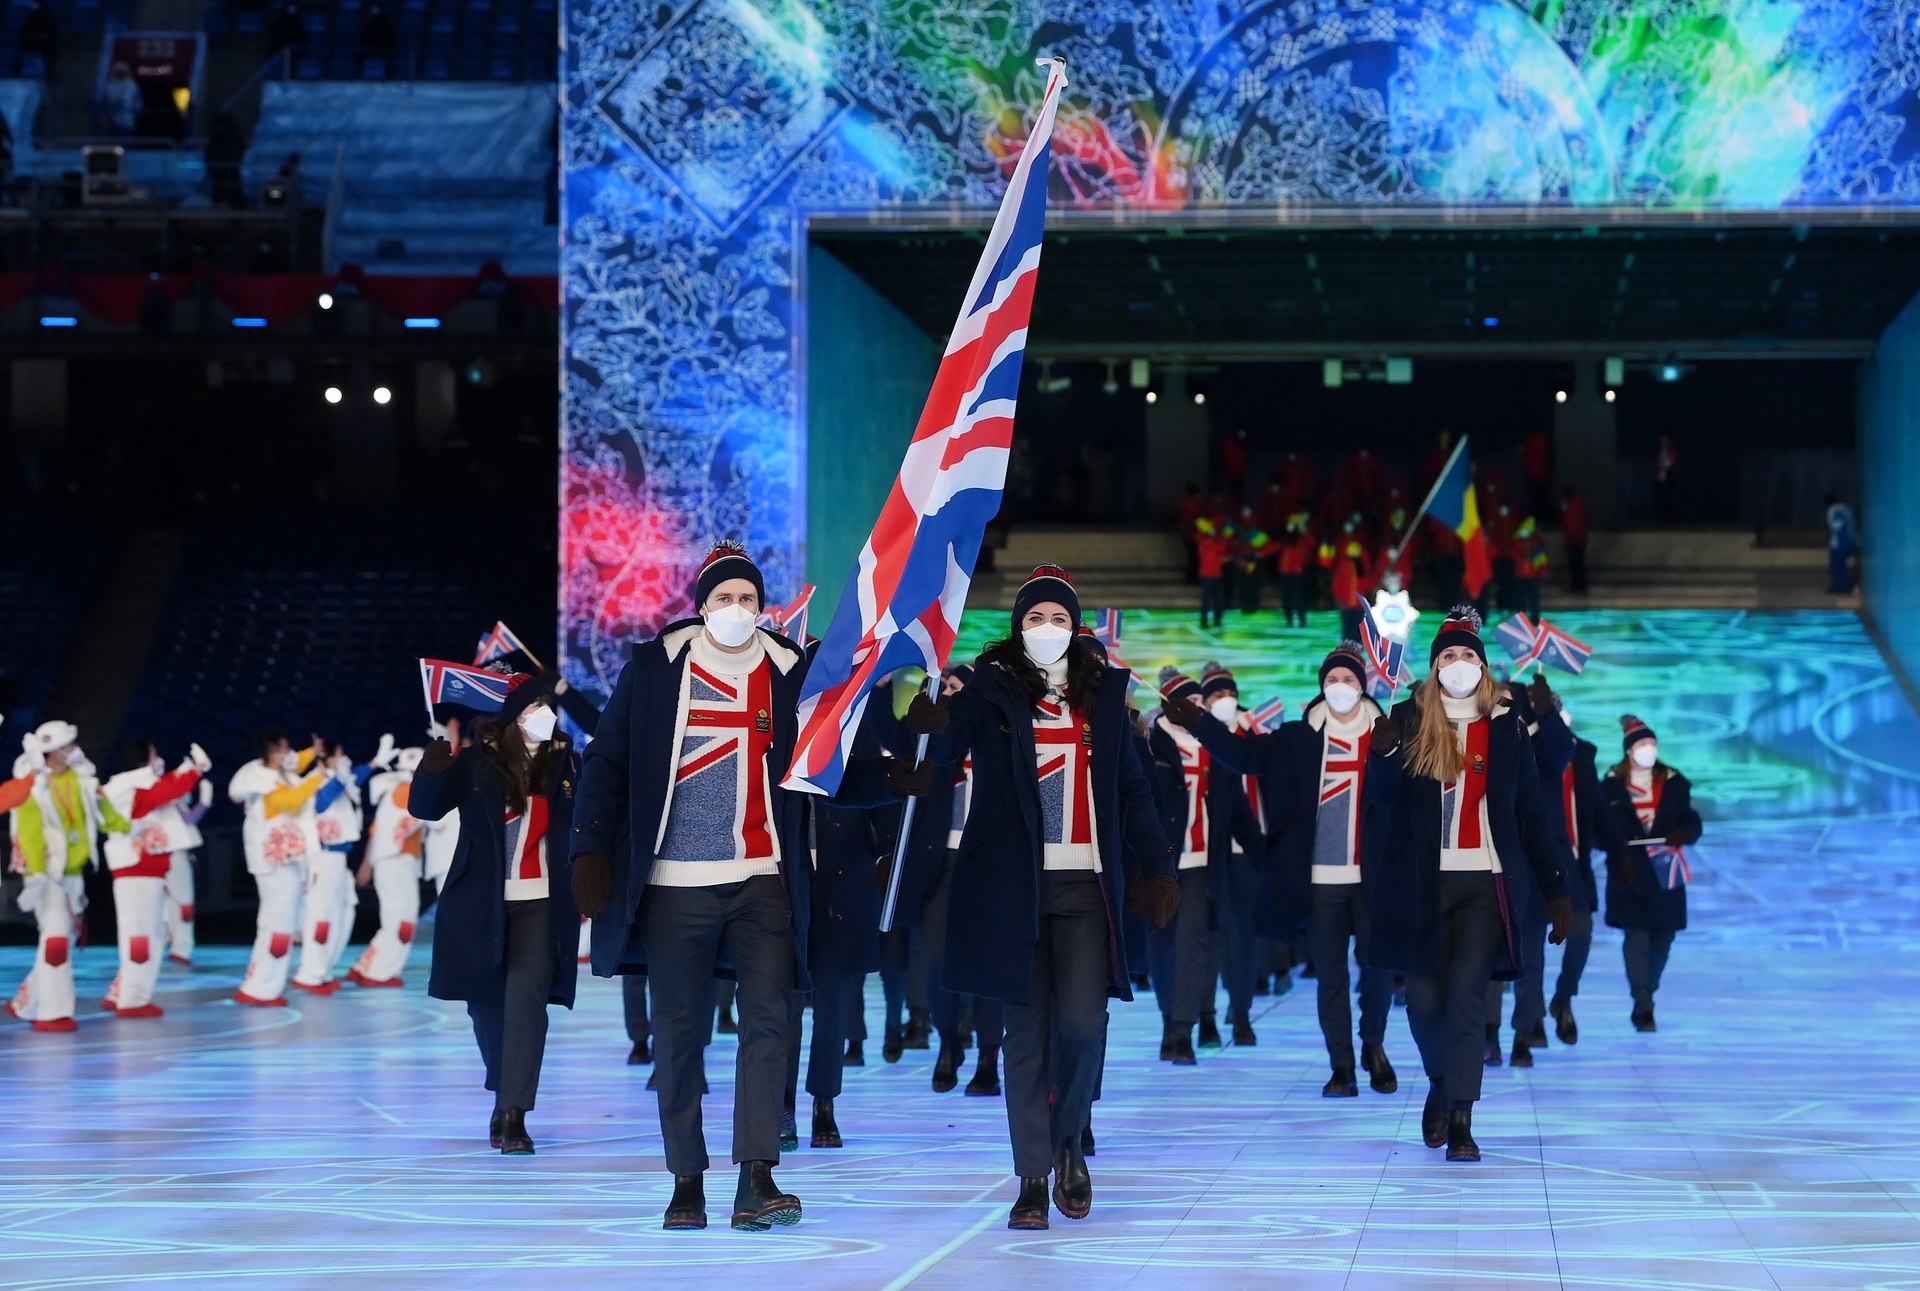 Muirhead was a Team GB flagbearer at the Winter Olympics opening ceremony.